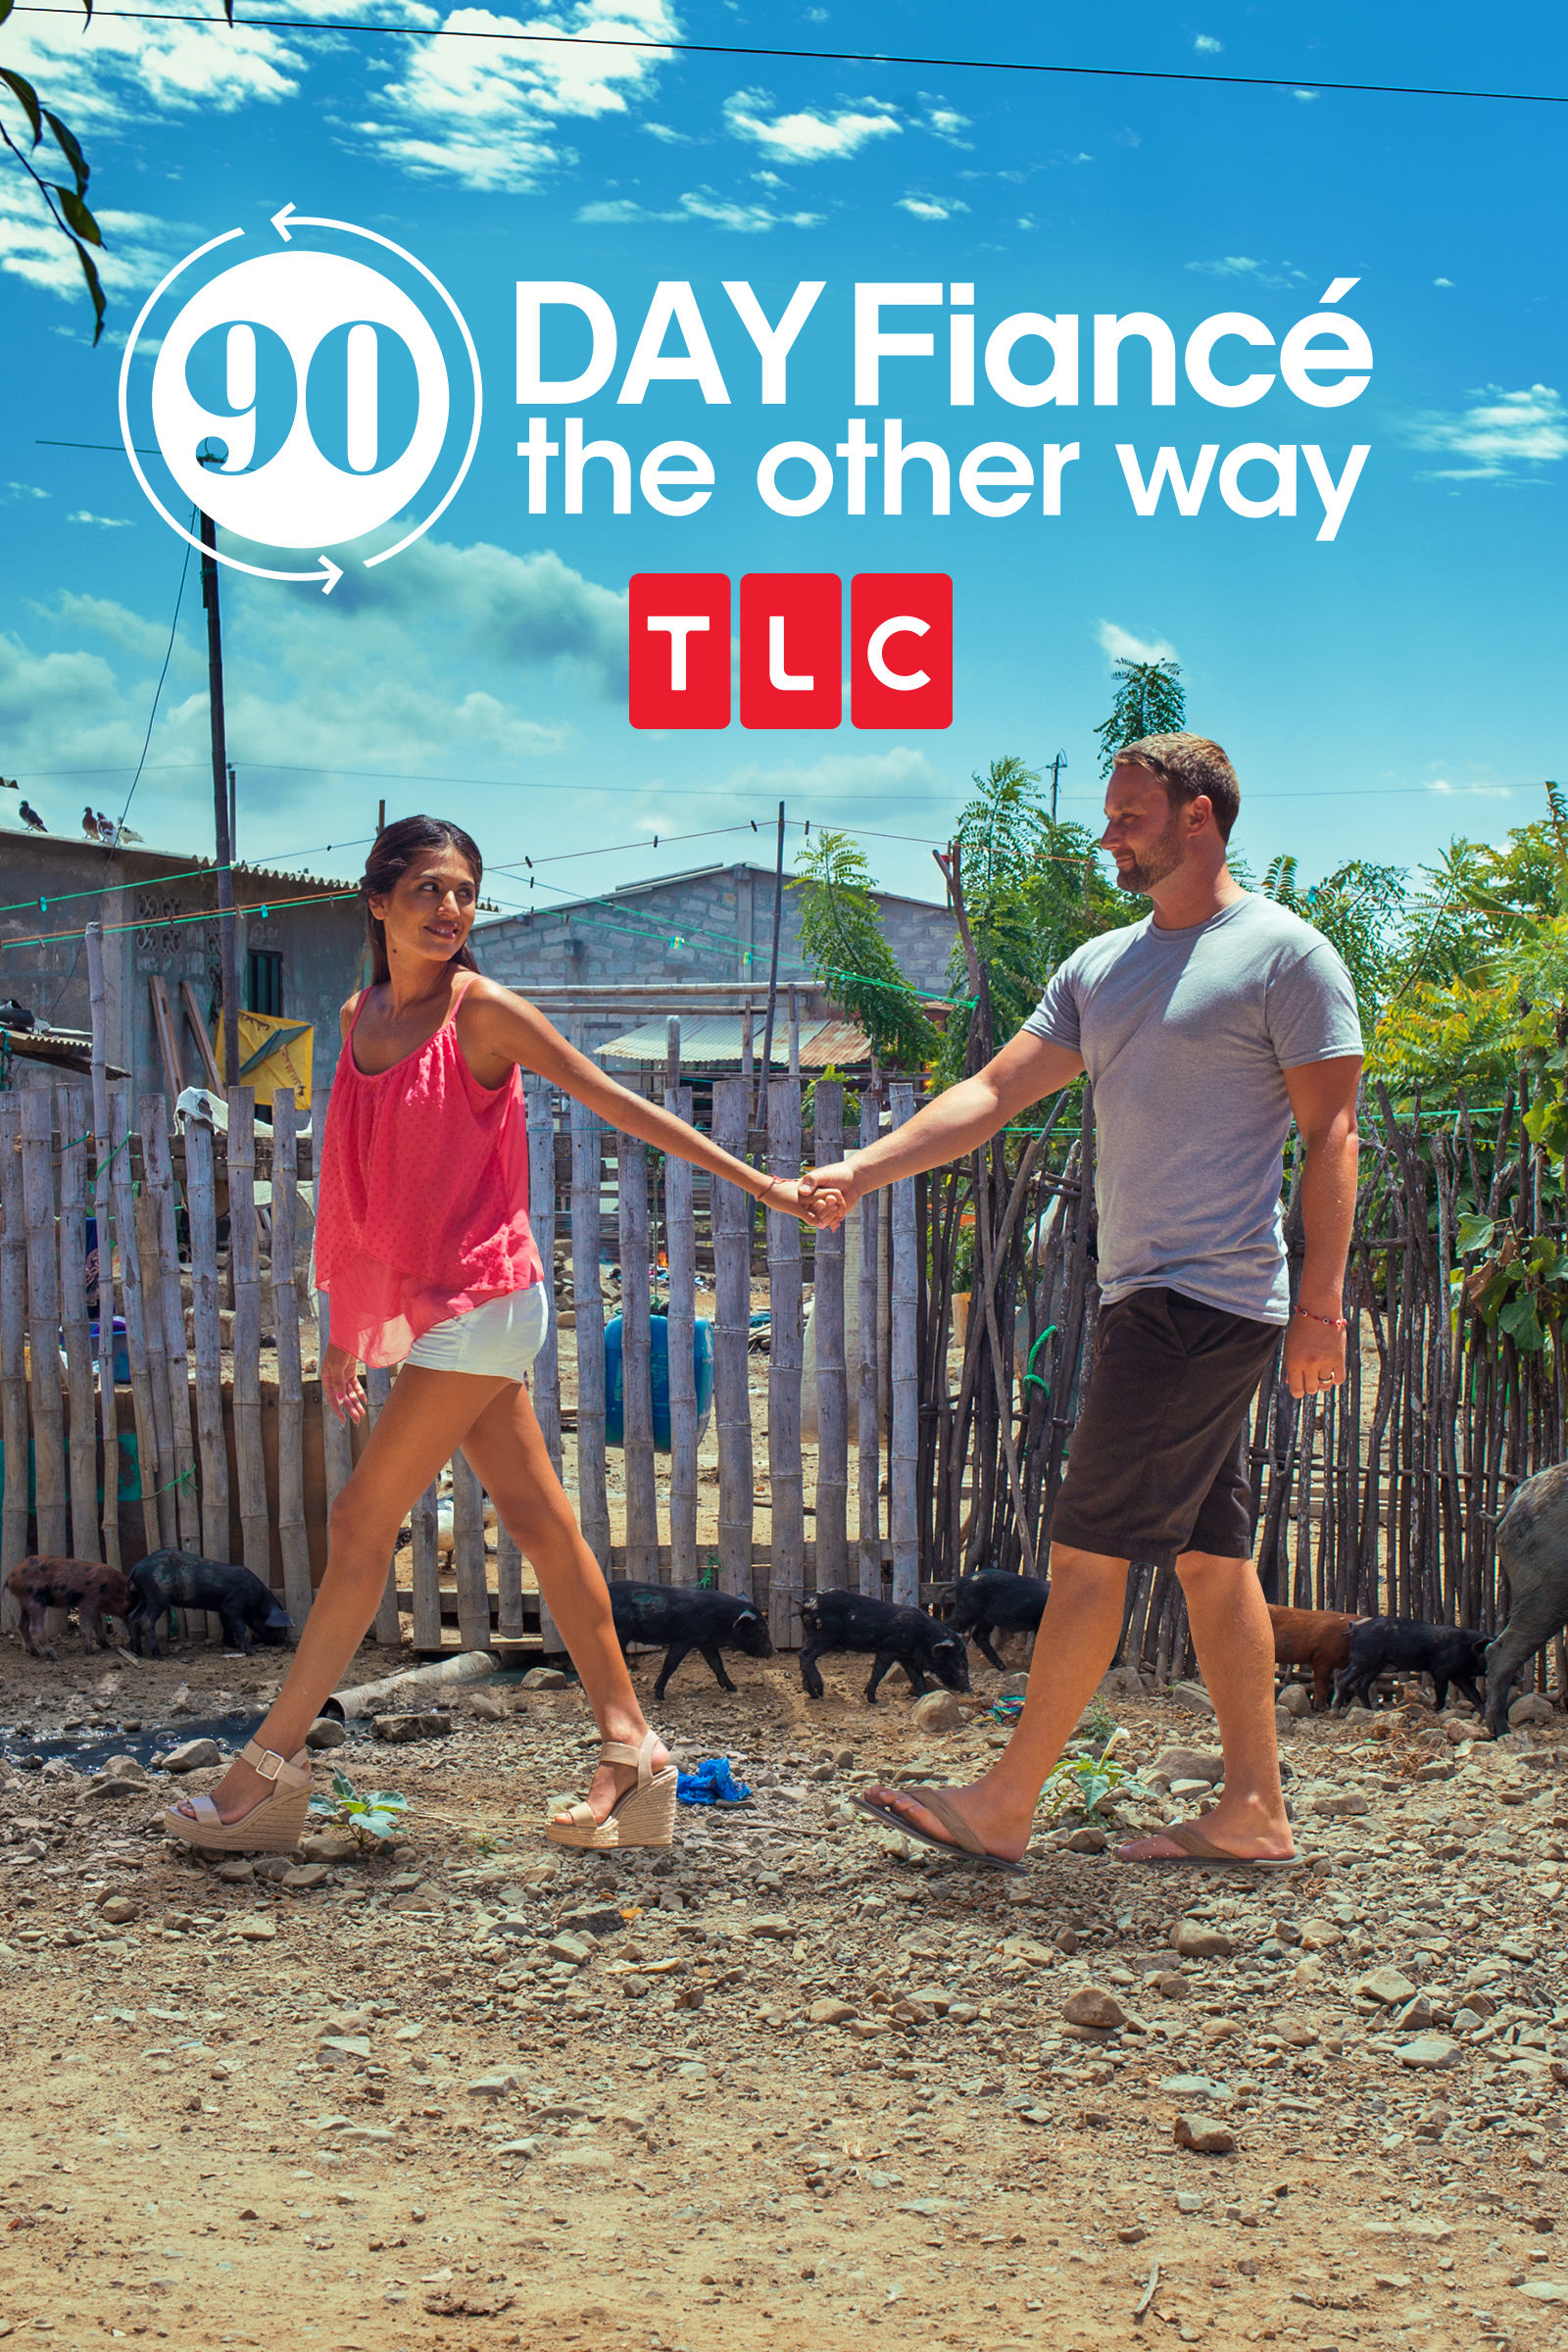 90 Day Fiance The Other Way Watch Online Free - Watch 90 Day Fiancé: The Other Way online free